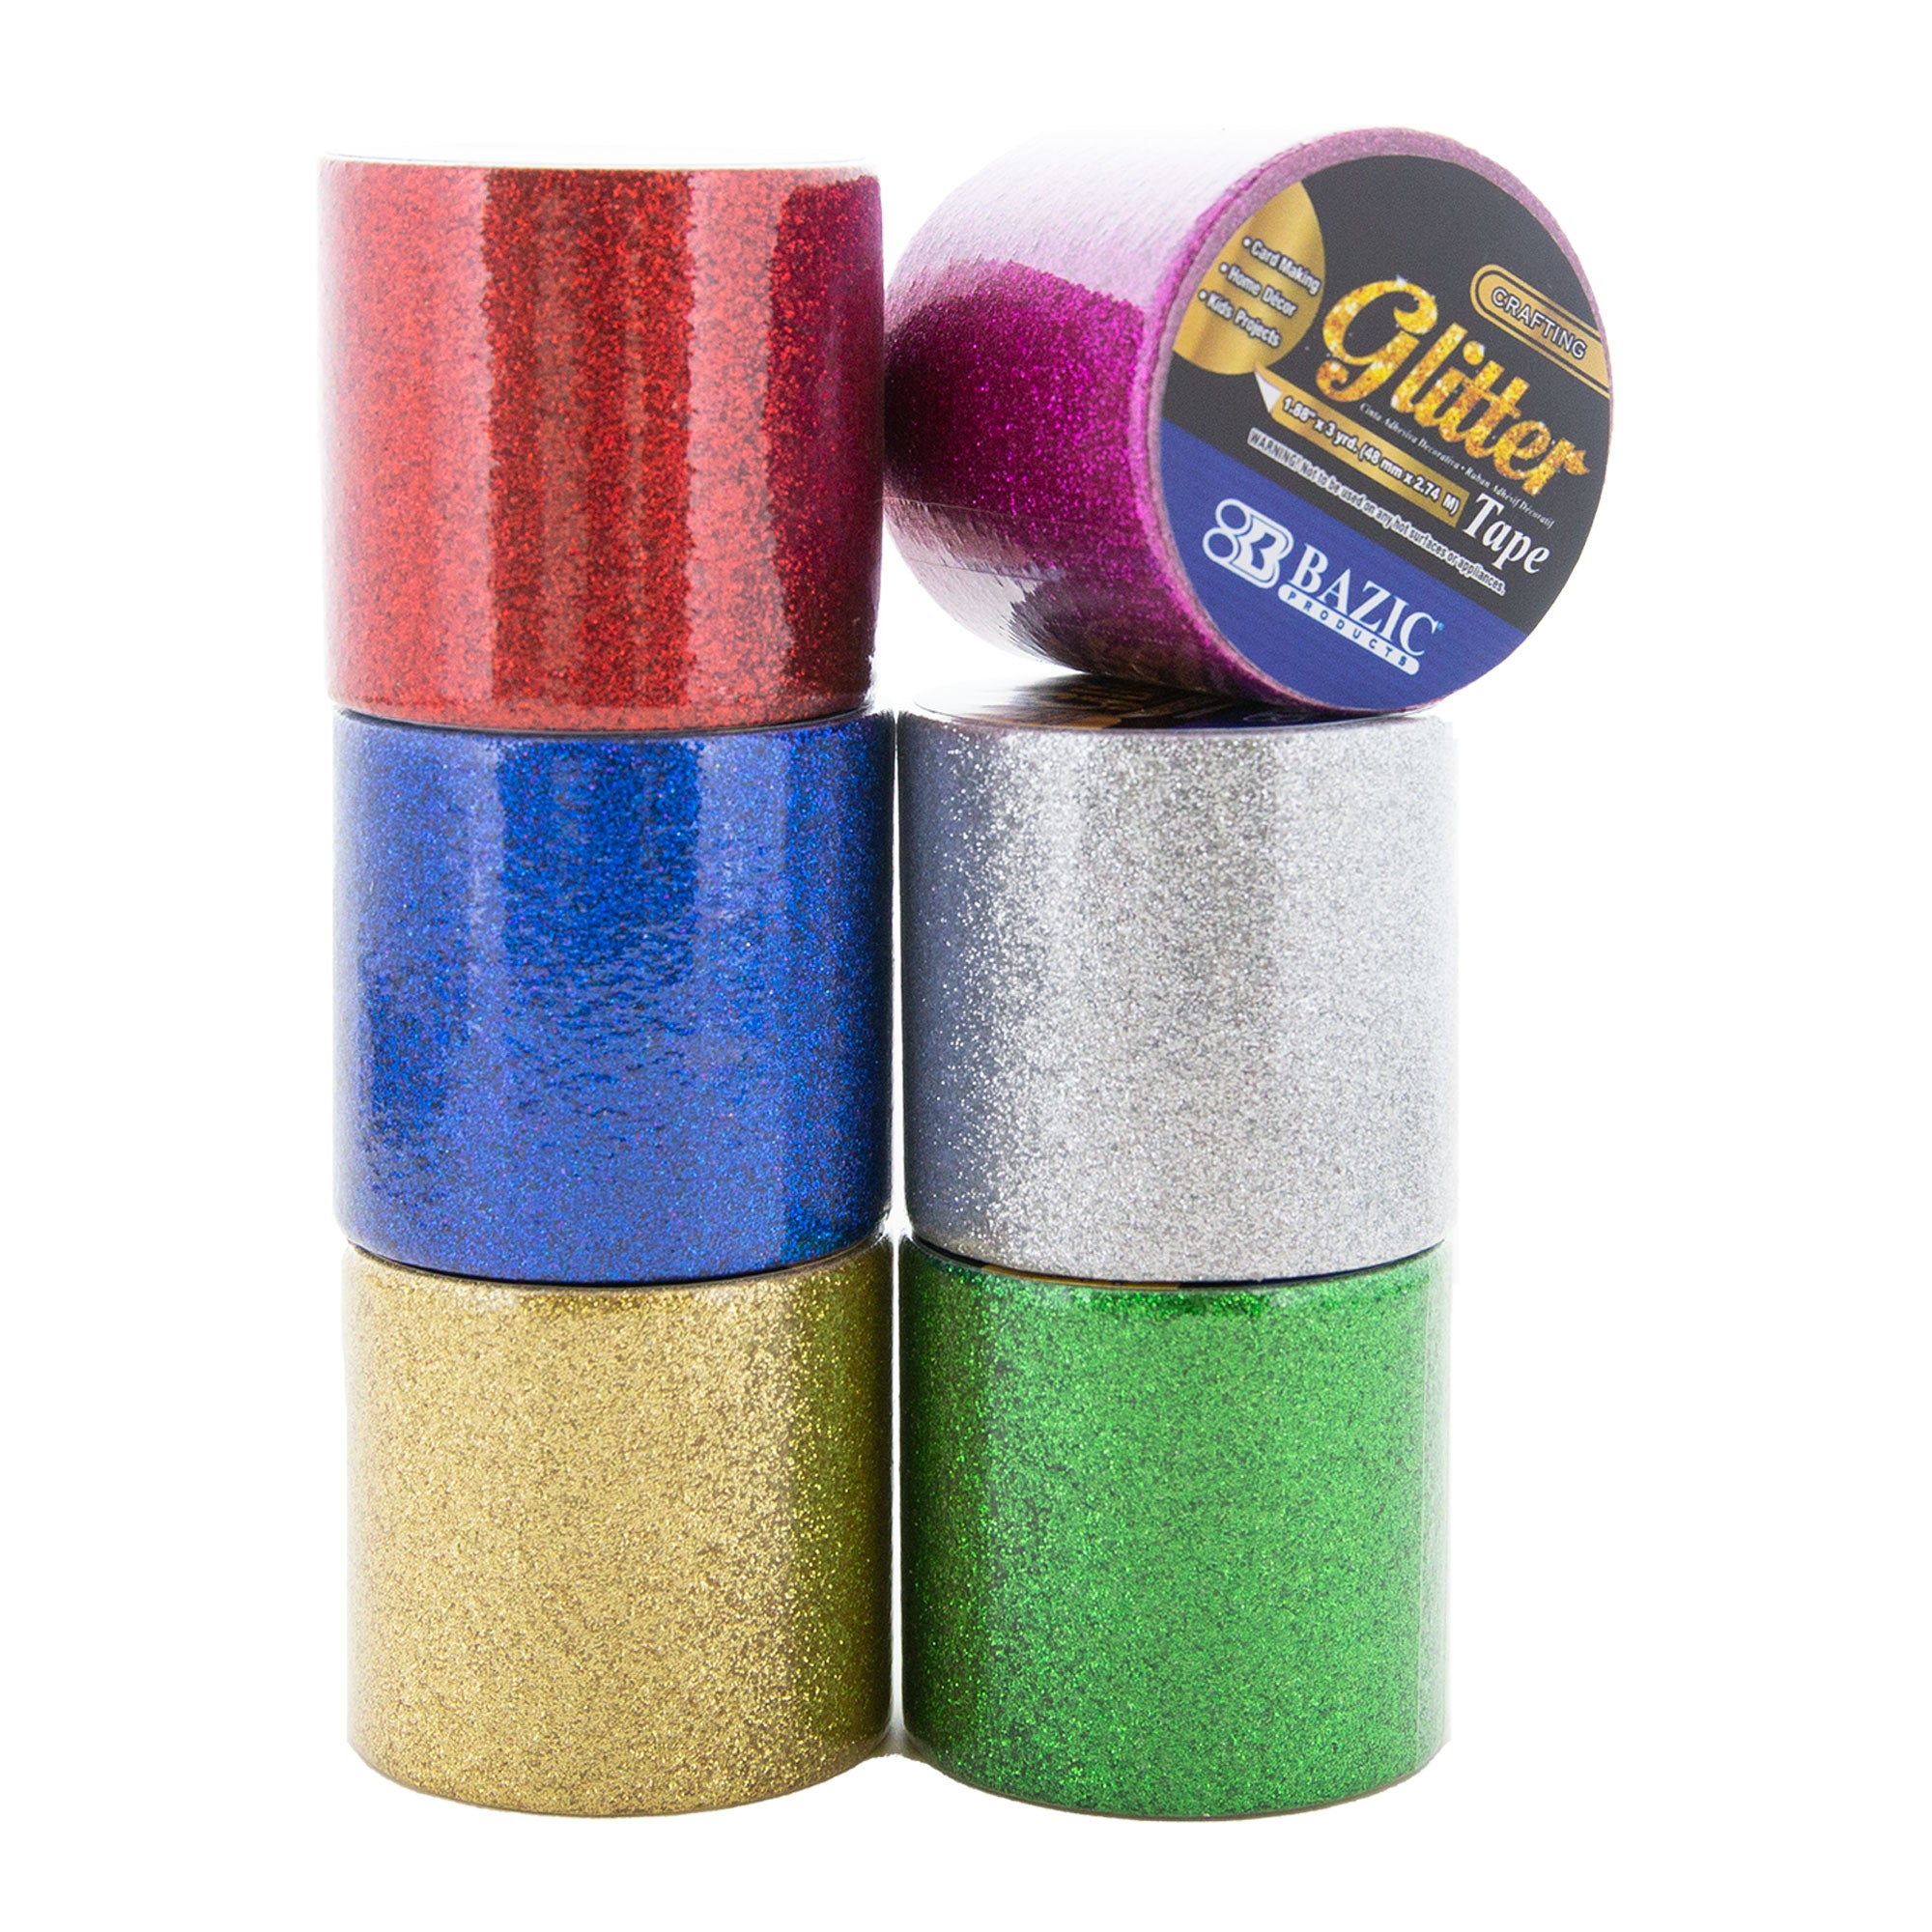 DIY Color Blocked Glitter Magnets - The Crafted Life